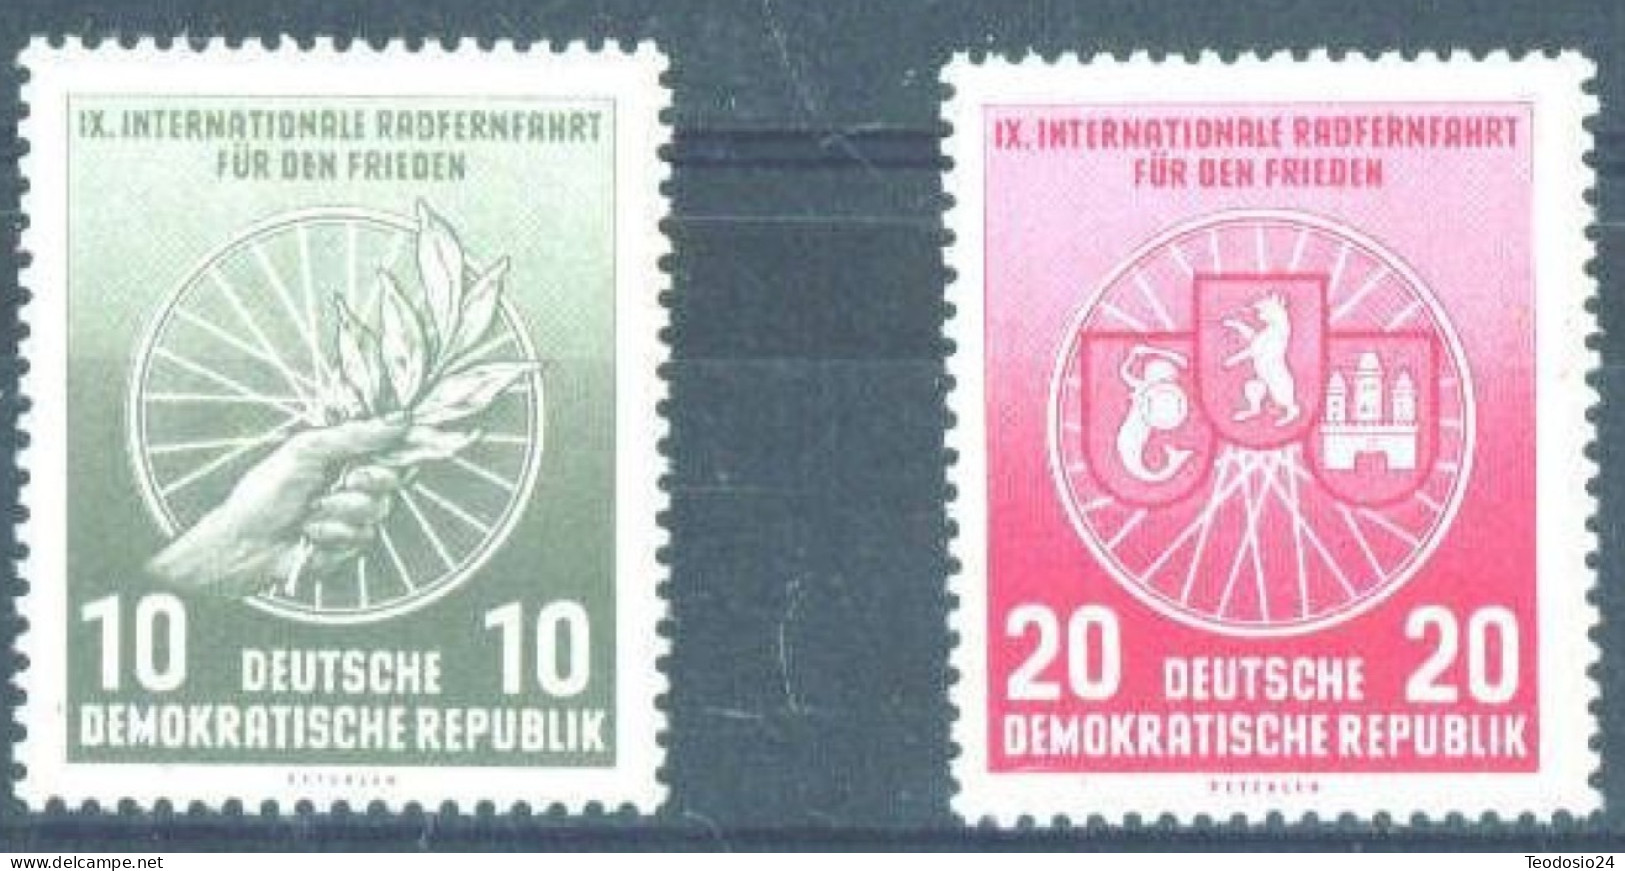 GERMANY DDR 1956   MiNr. 521 - 522 ** - Unused Stamps